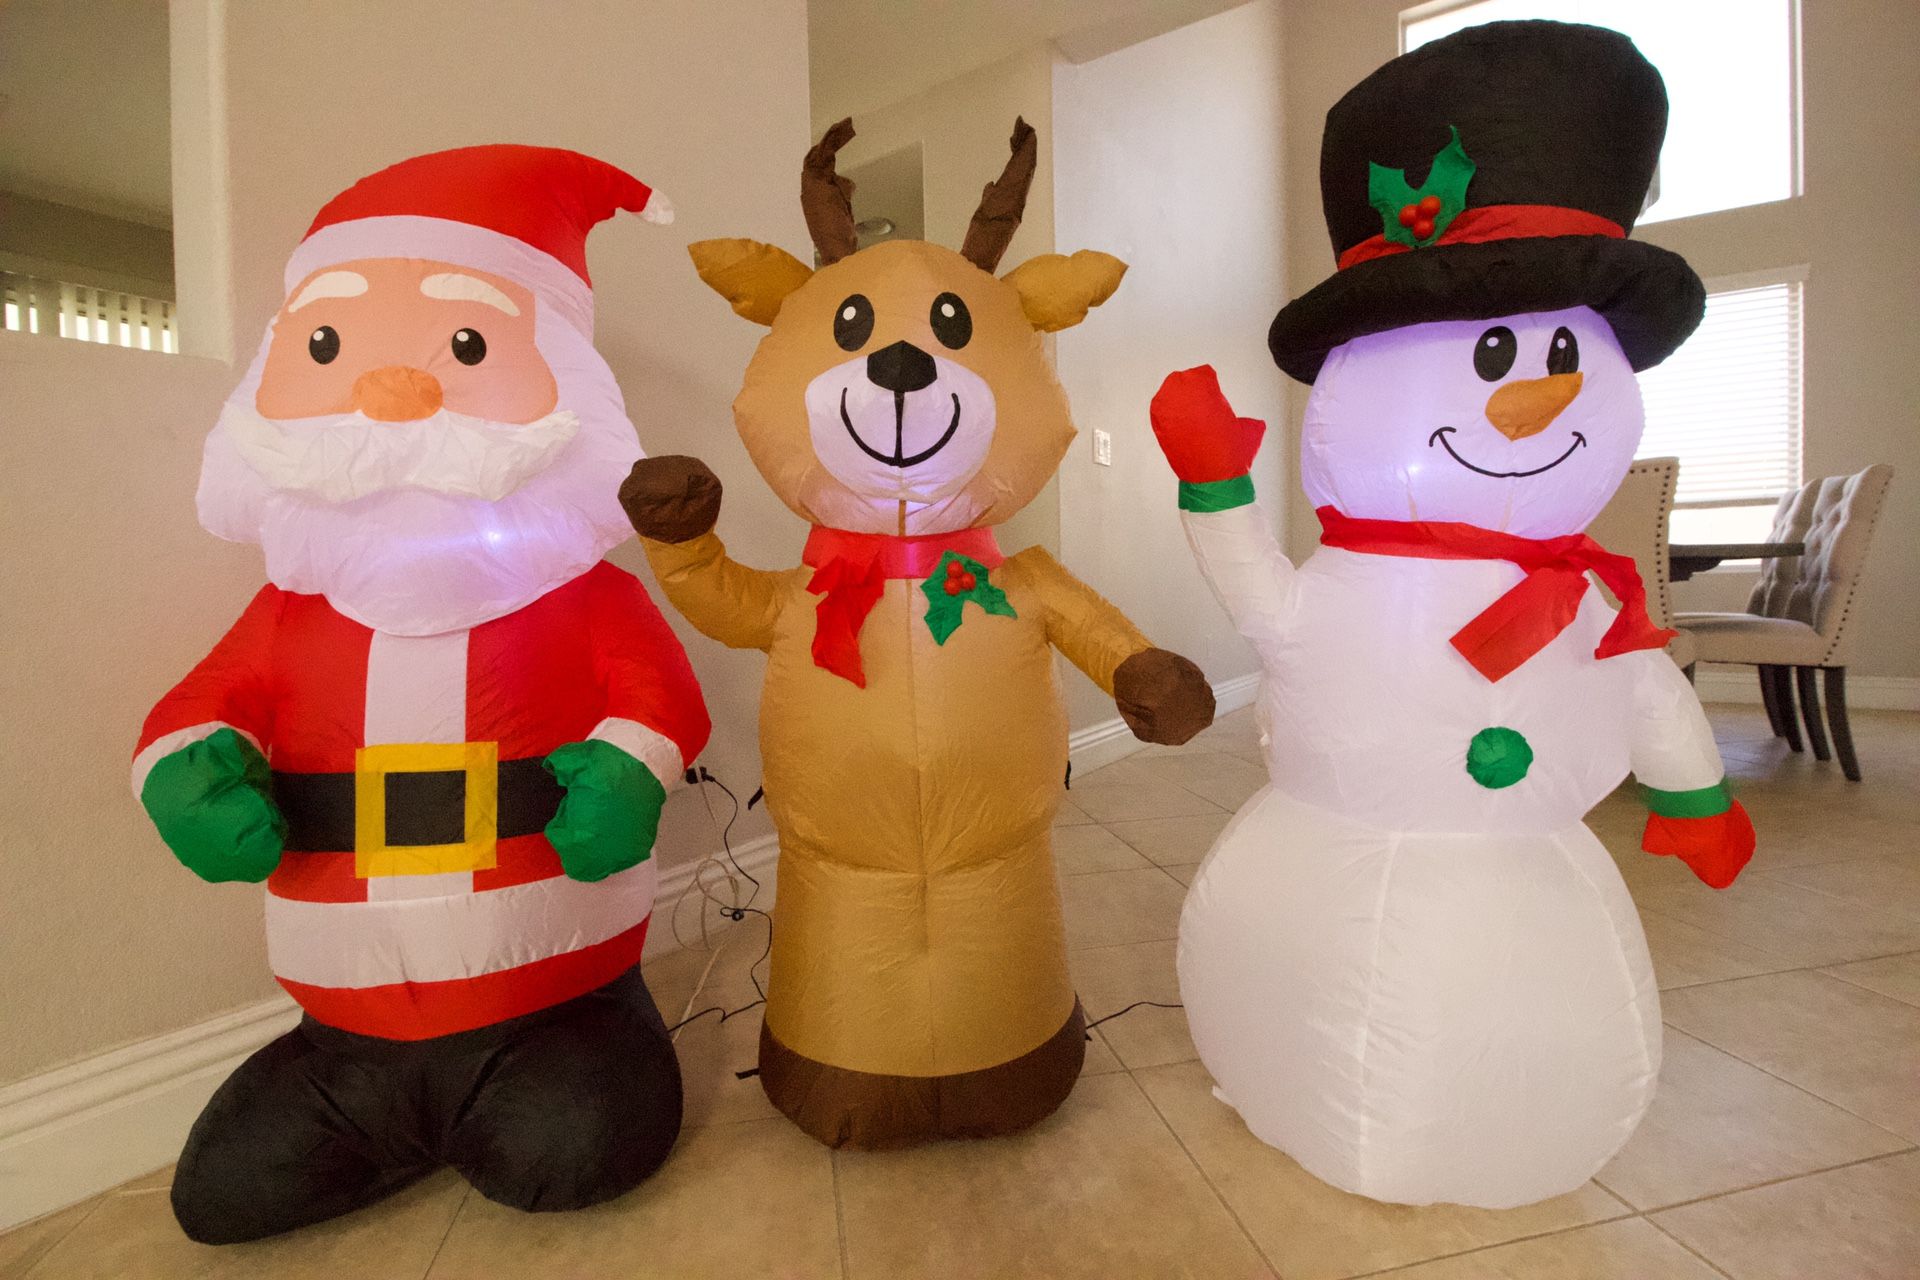 NEW 3 Christmas Decorations Deer Snowman Santa for house front yard furniture living dining room